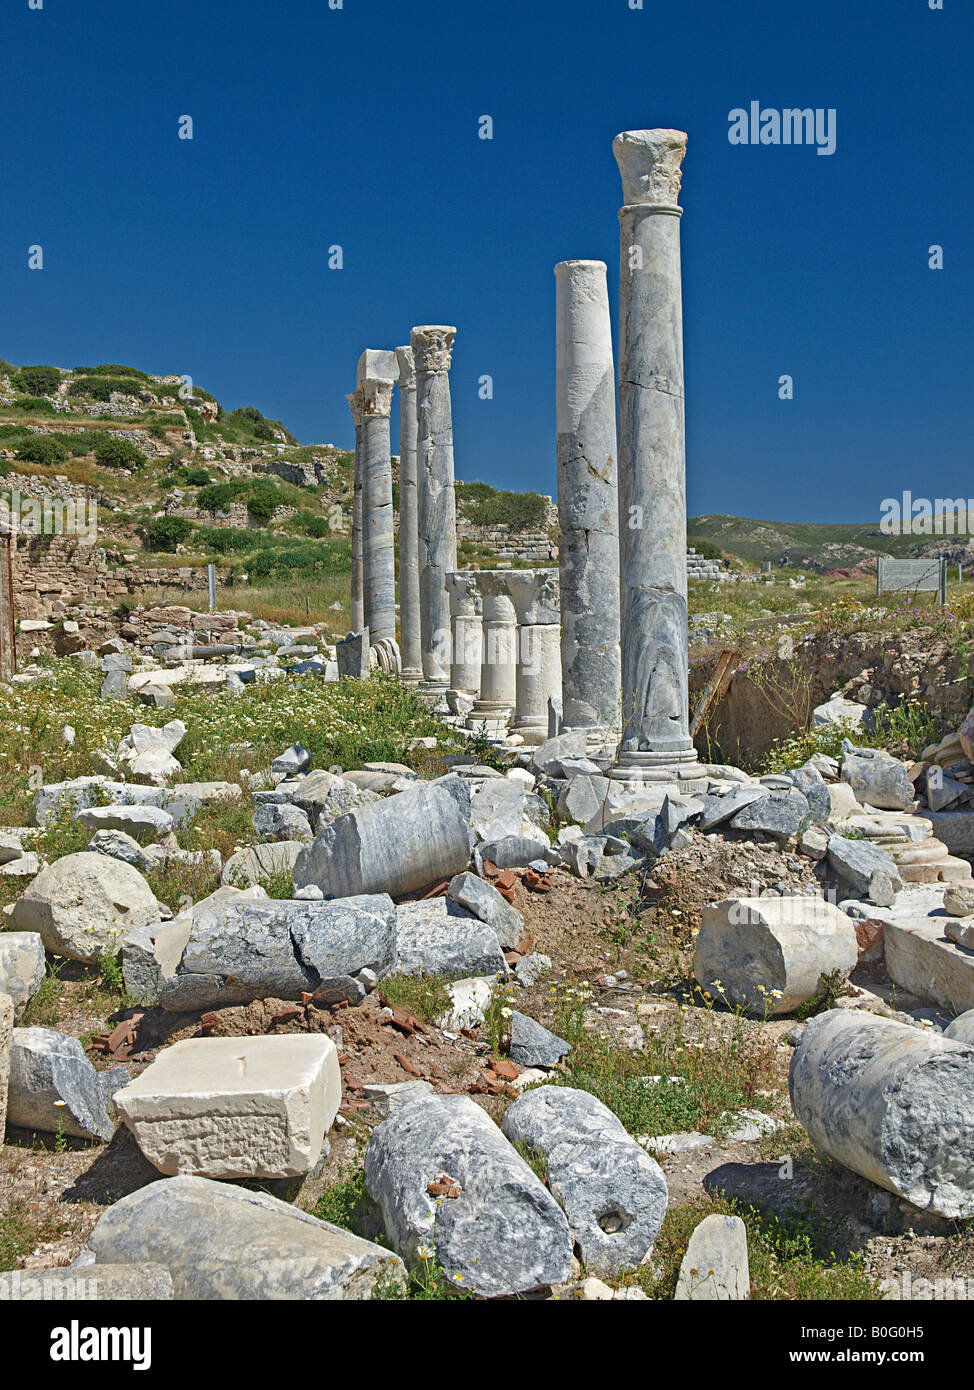 COLUMNS DETAIL OF PART OF THE RUINS AND OF THE LYCIAN CITY OF KNIDOS, DATCA PENINSULA MUGLA TURKEY Stock Photo